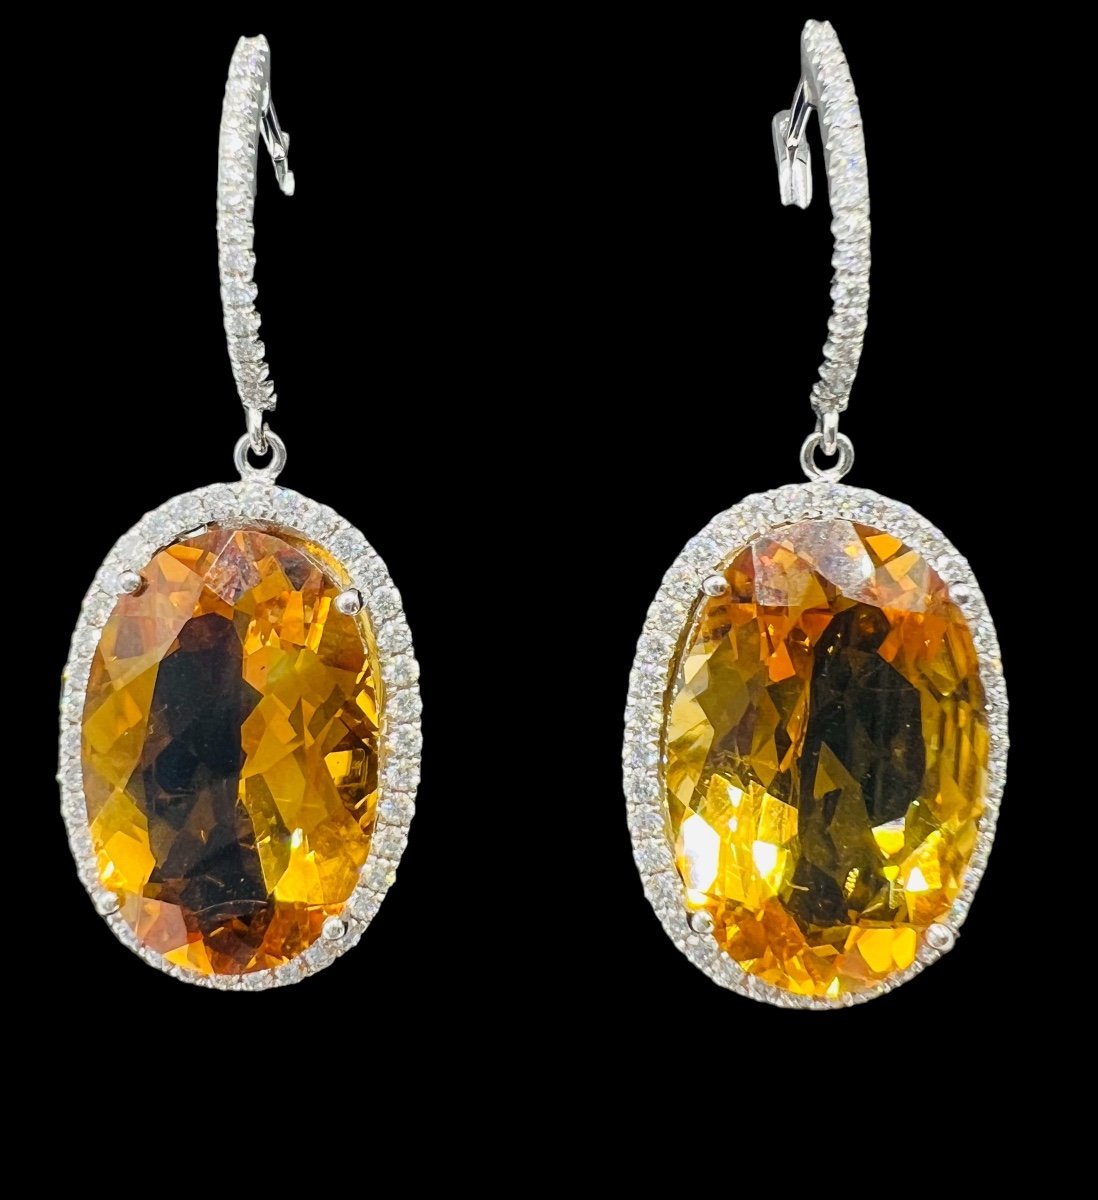 Pair Of 18 Carat Gold Earrings Set With Citrines Surrounded By Diamonds-photo-4